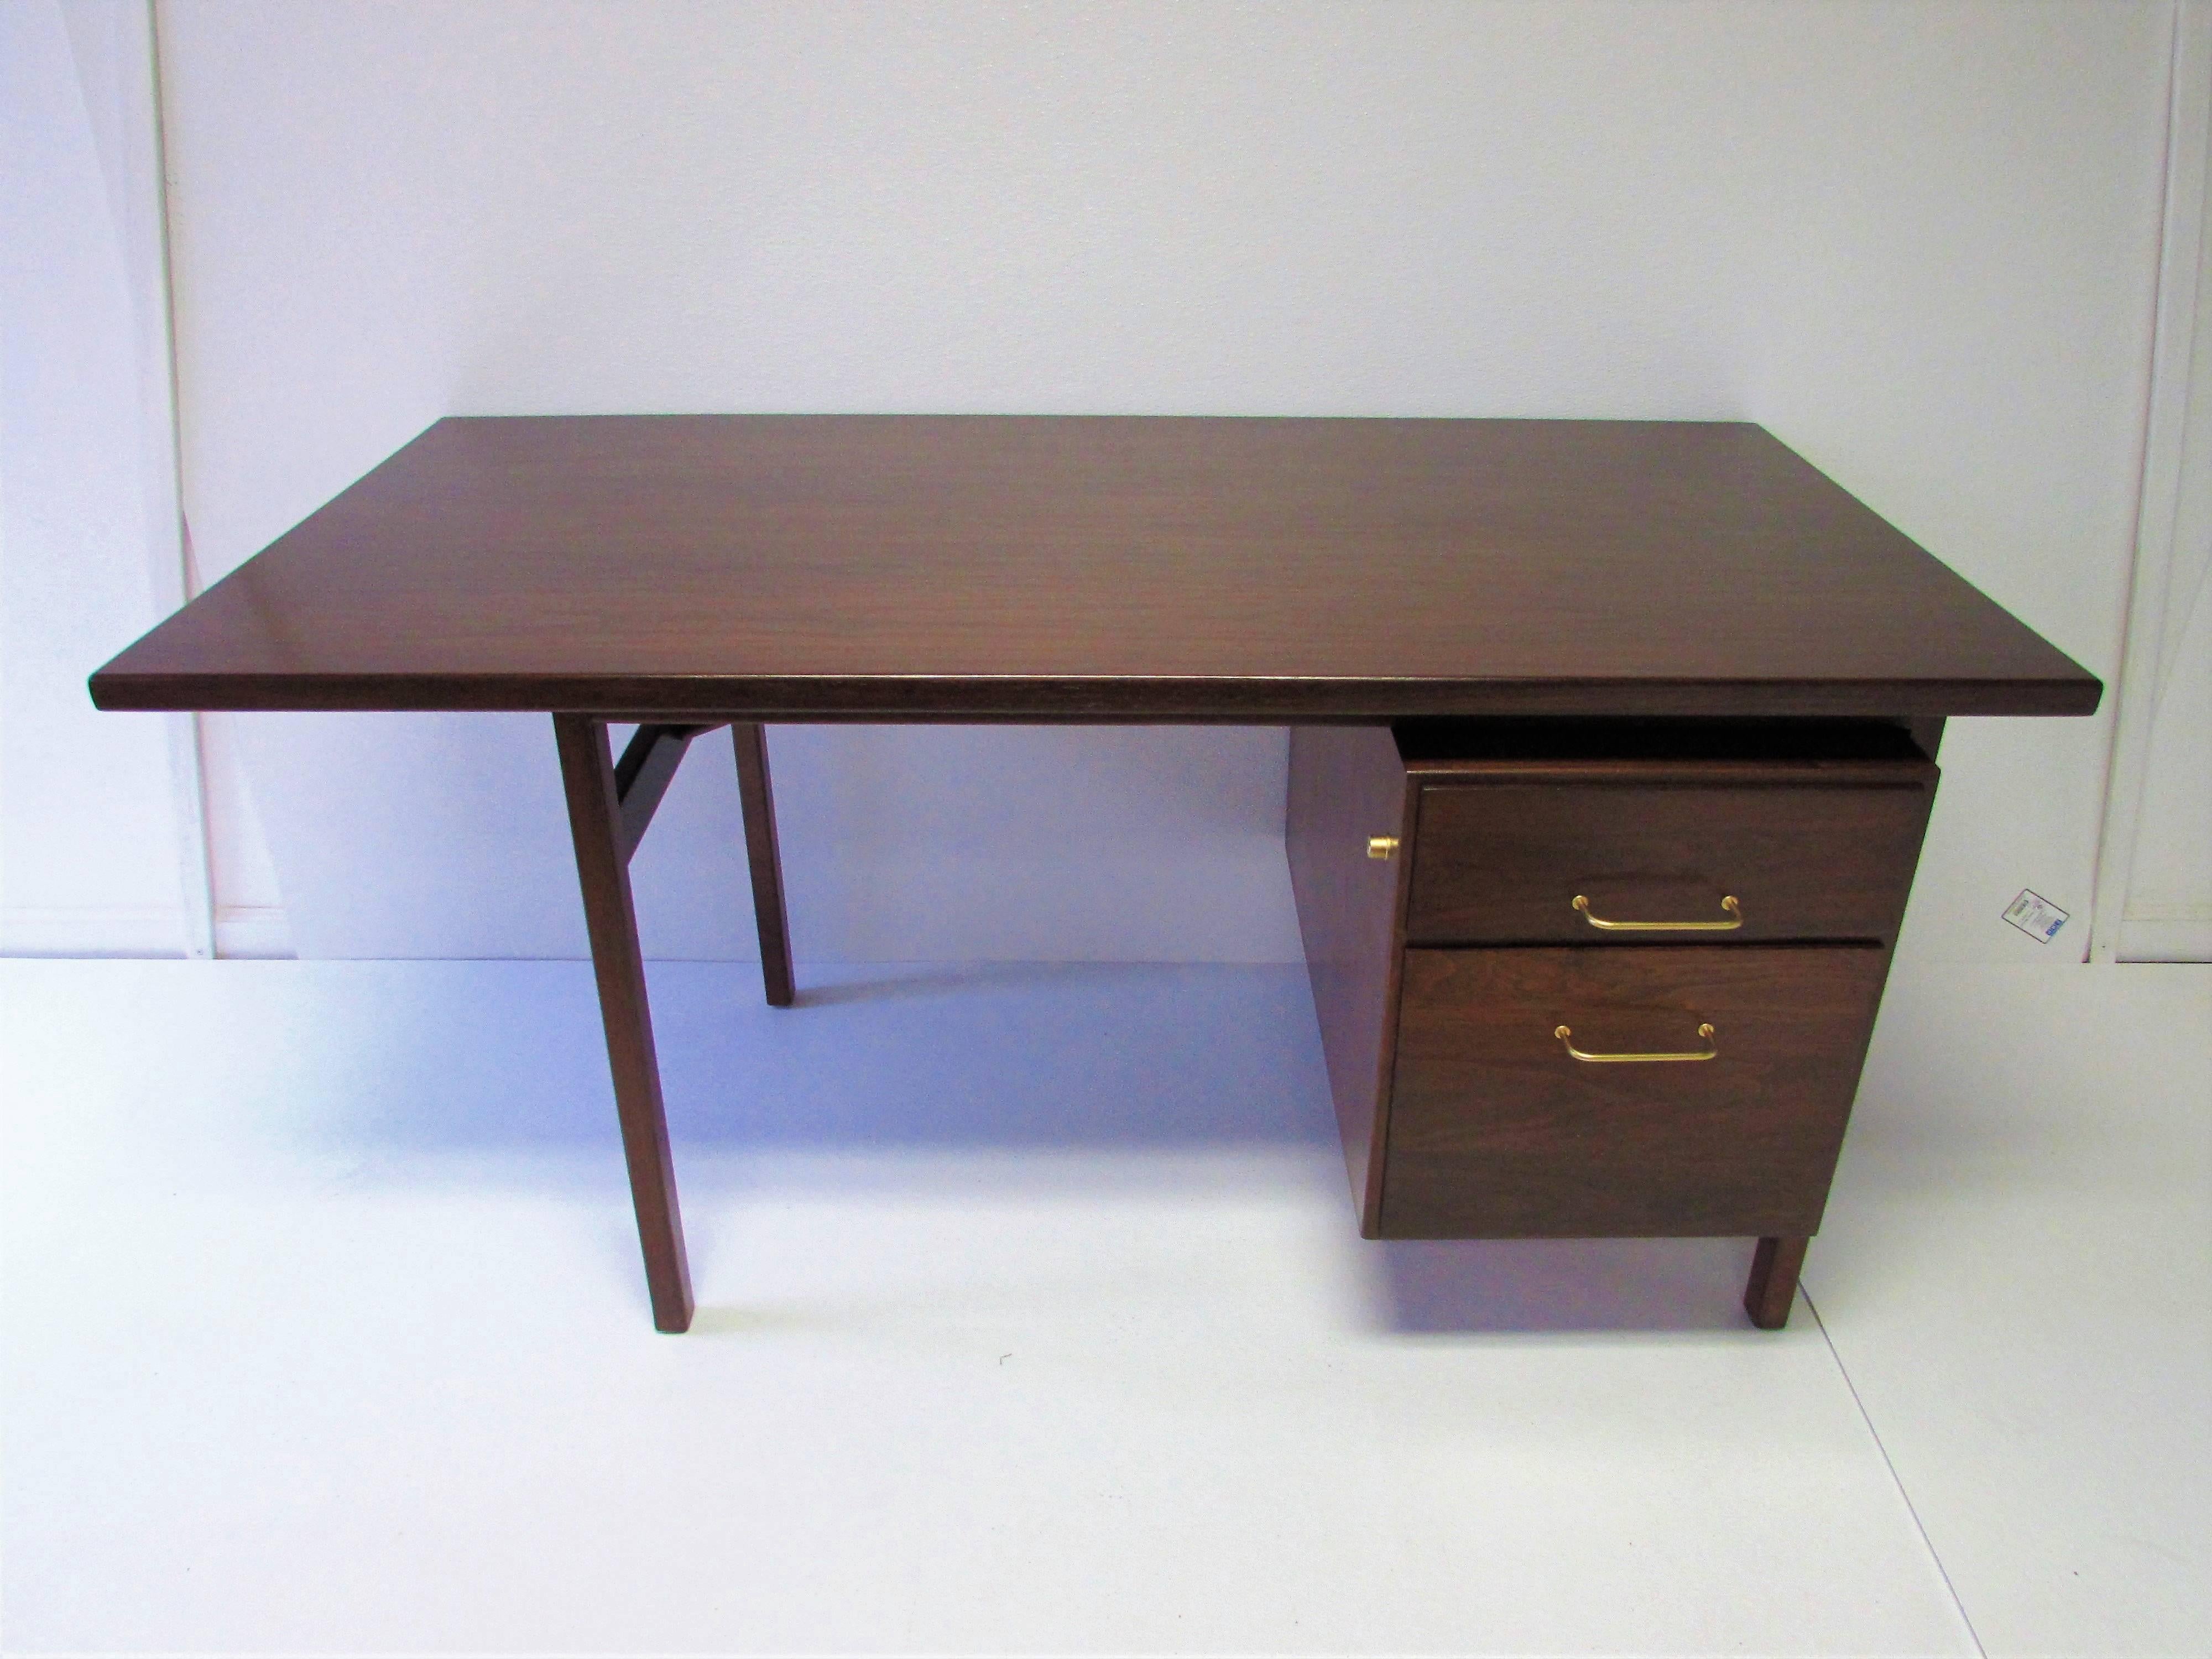 Refinished walnut desk with floating top, two drawers, and original brass handles attributed to Jens Risom.